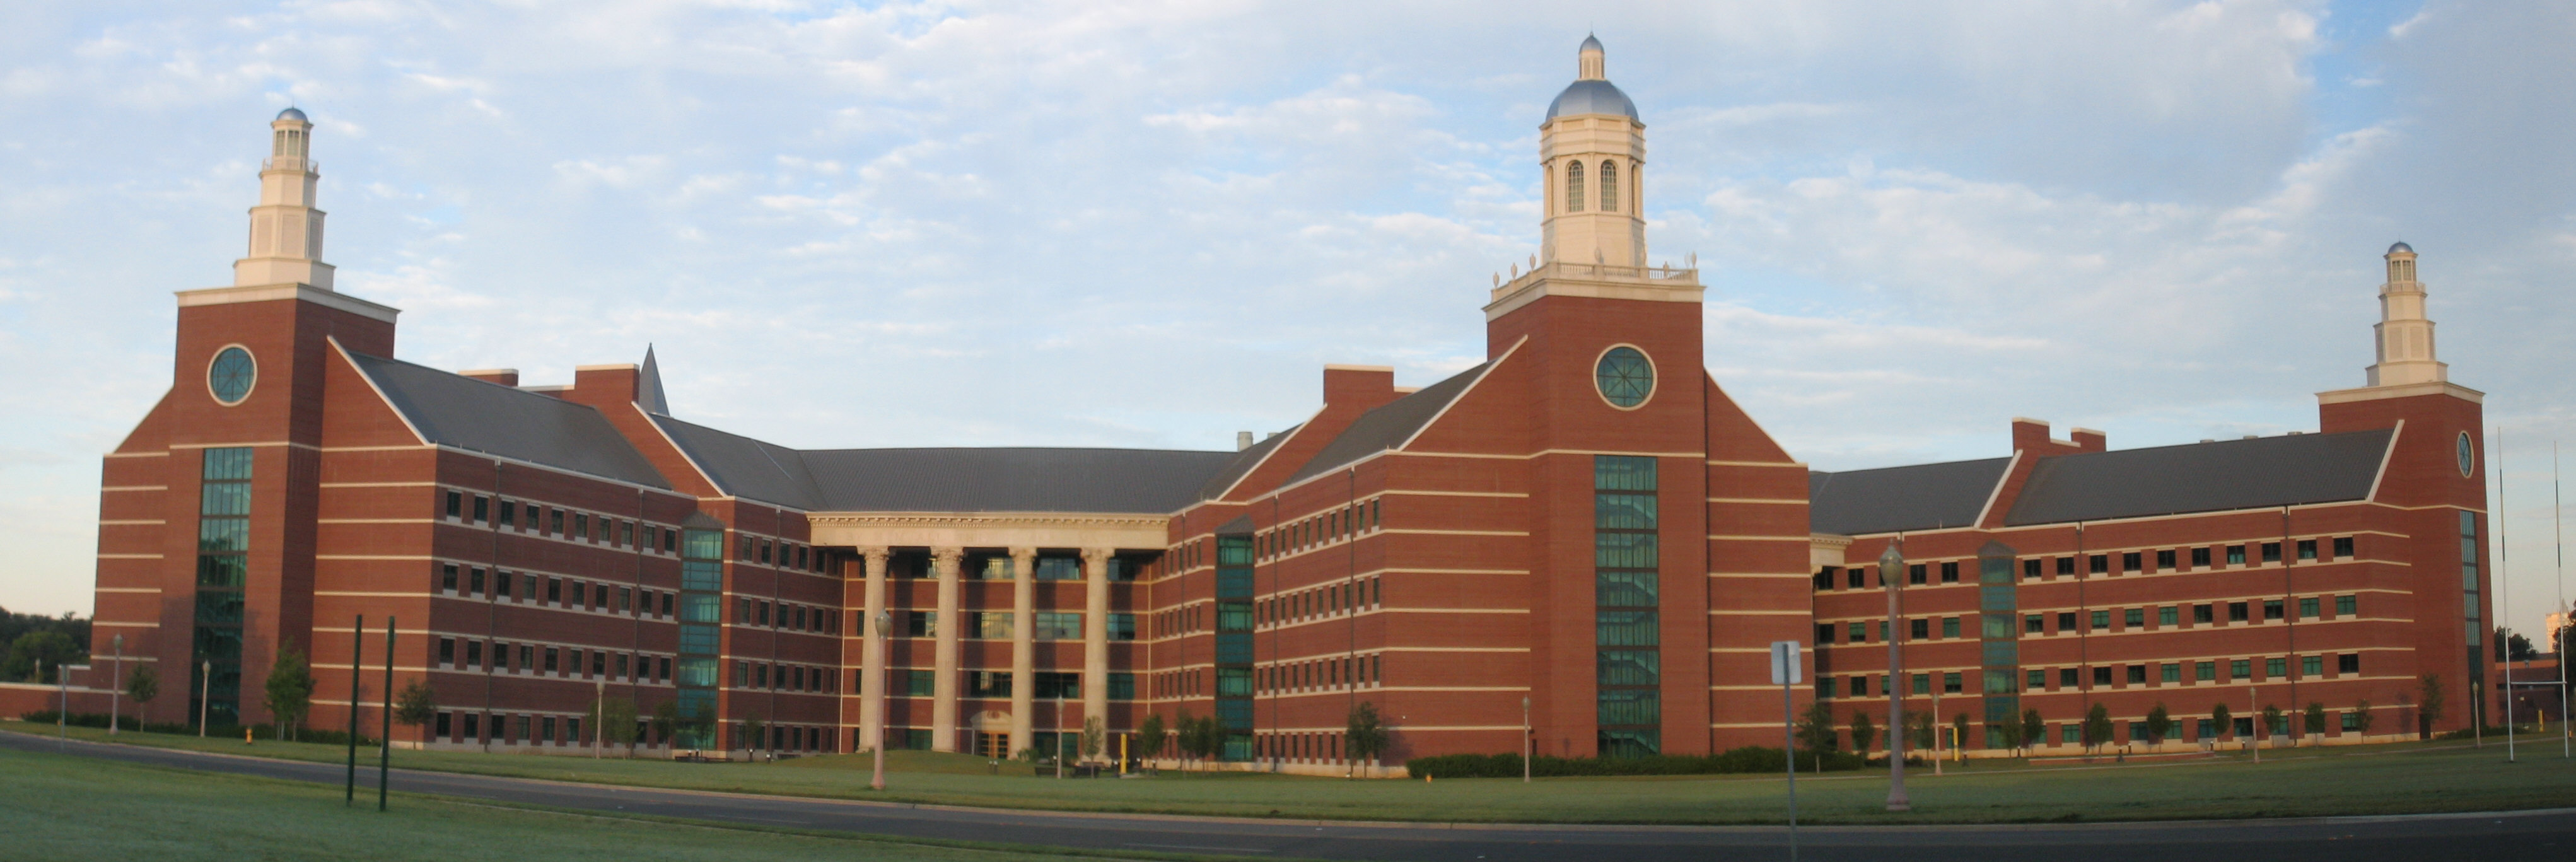 Baylor Science Building (panoramic Picture)   Baylor University%2C Waco%2C Texas 